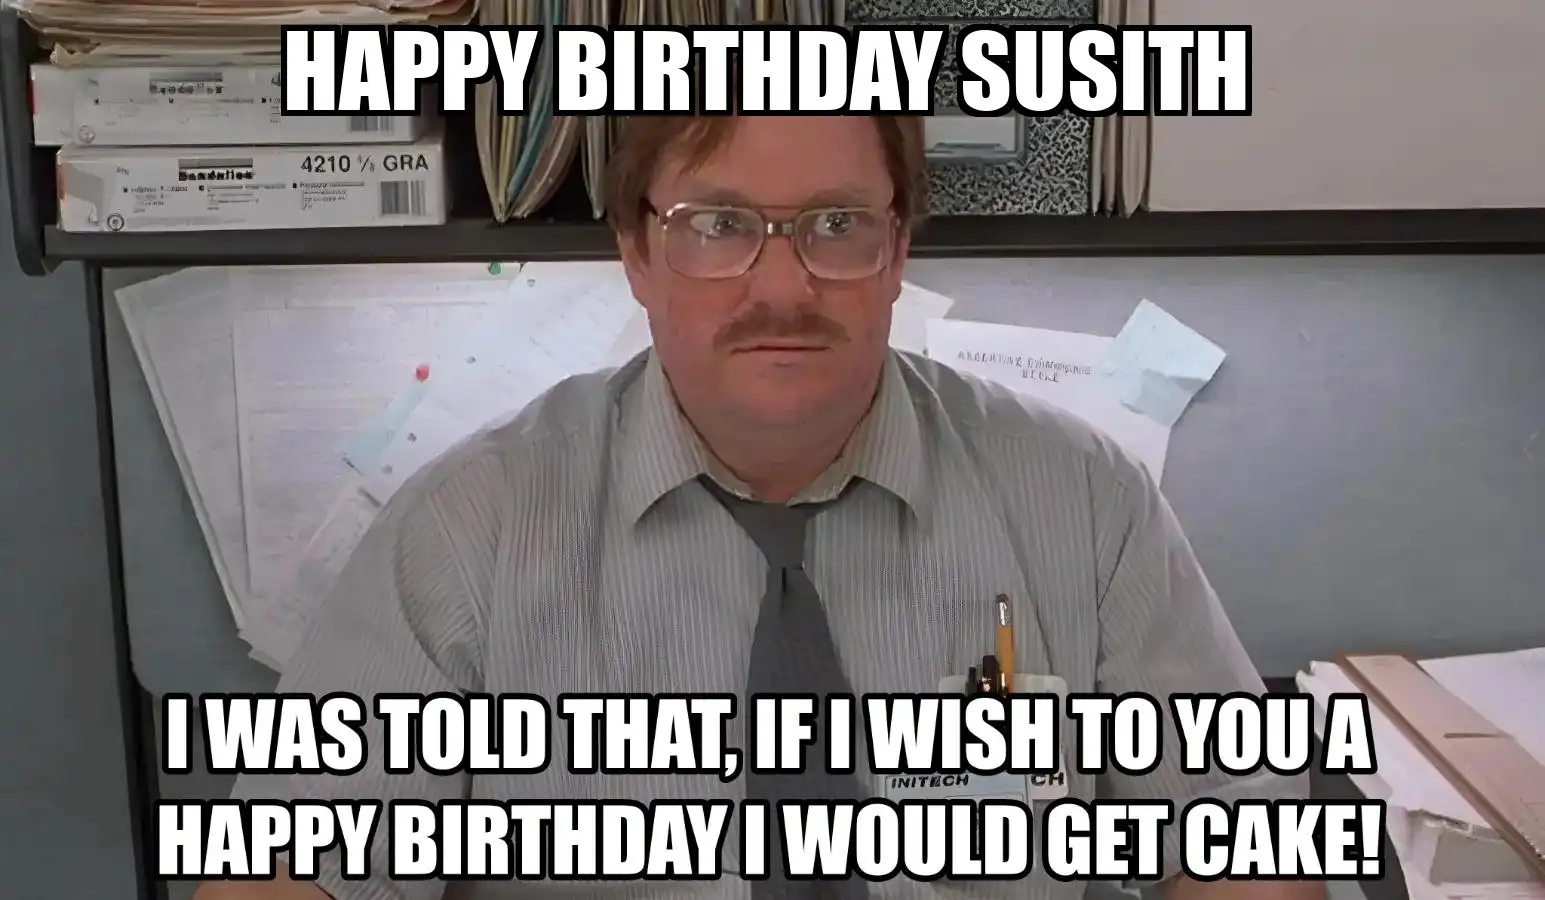 Happy Birthday Susith I Would Get A Cake Meme